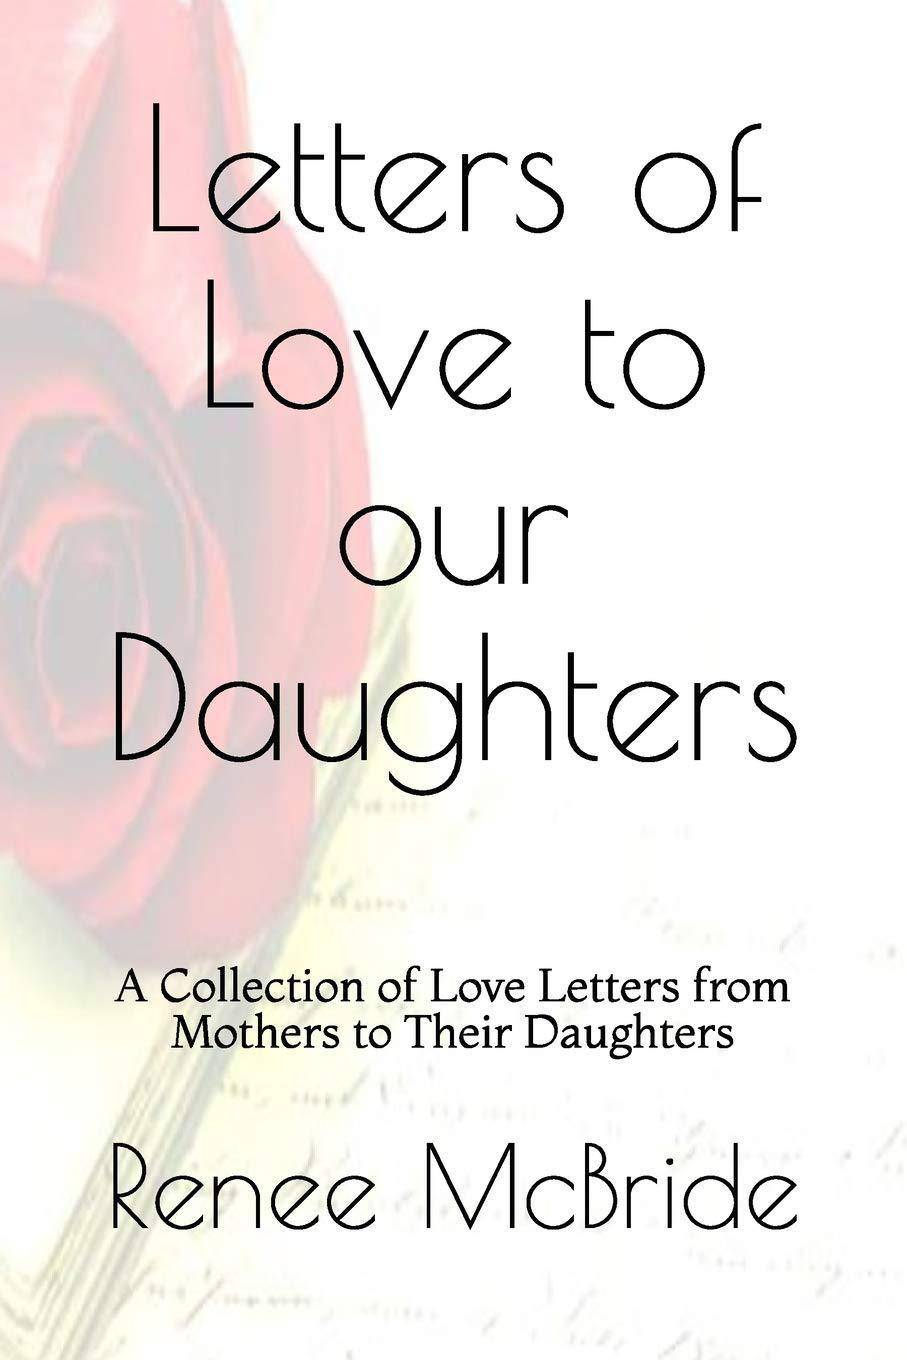 Love Letters to Our Daughters - SureShot Books Publishing LLC